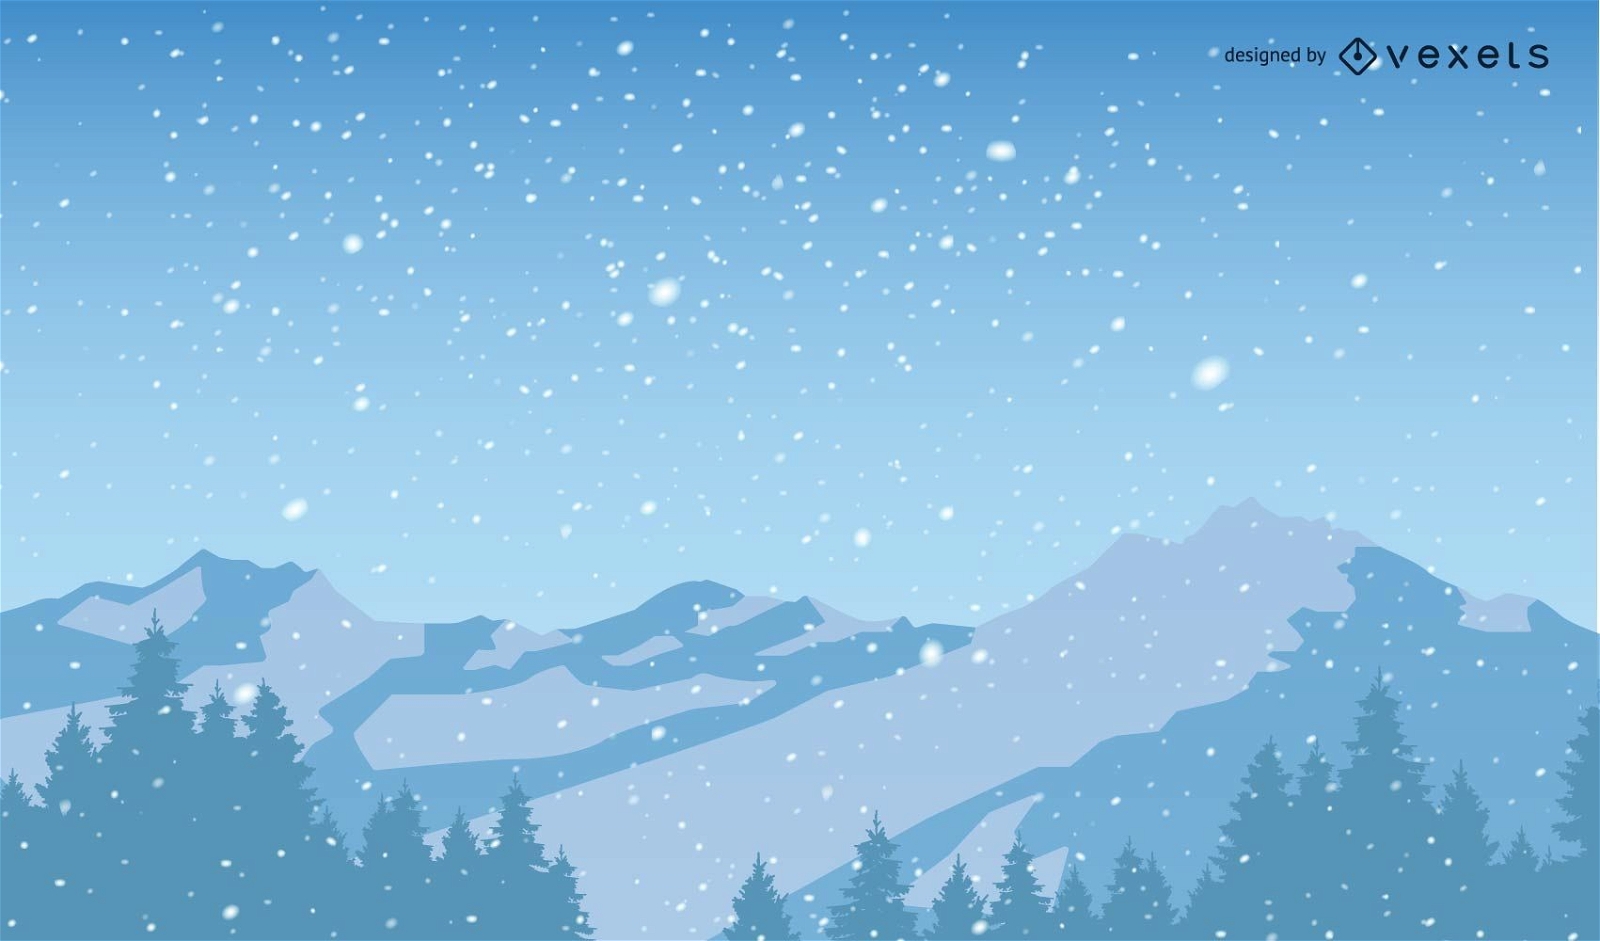 Snowy Christmas Mountains Background